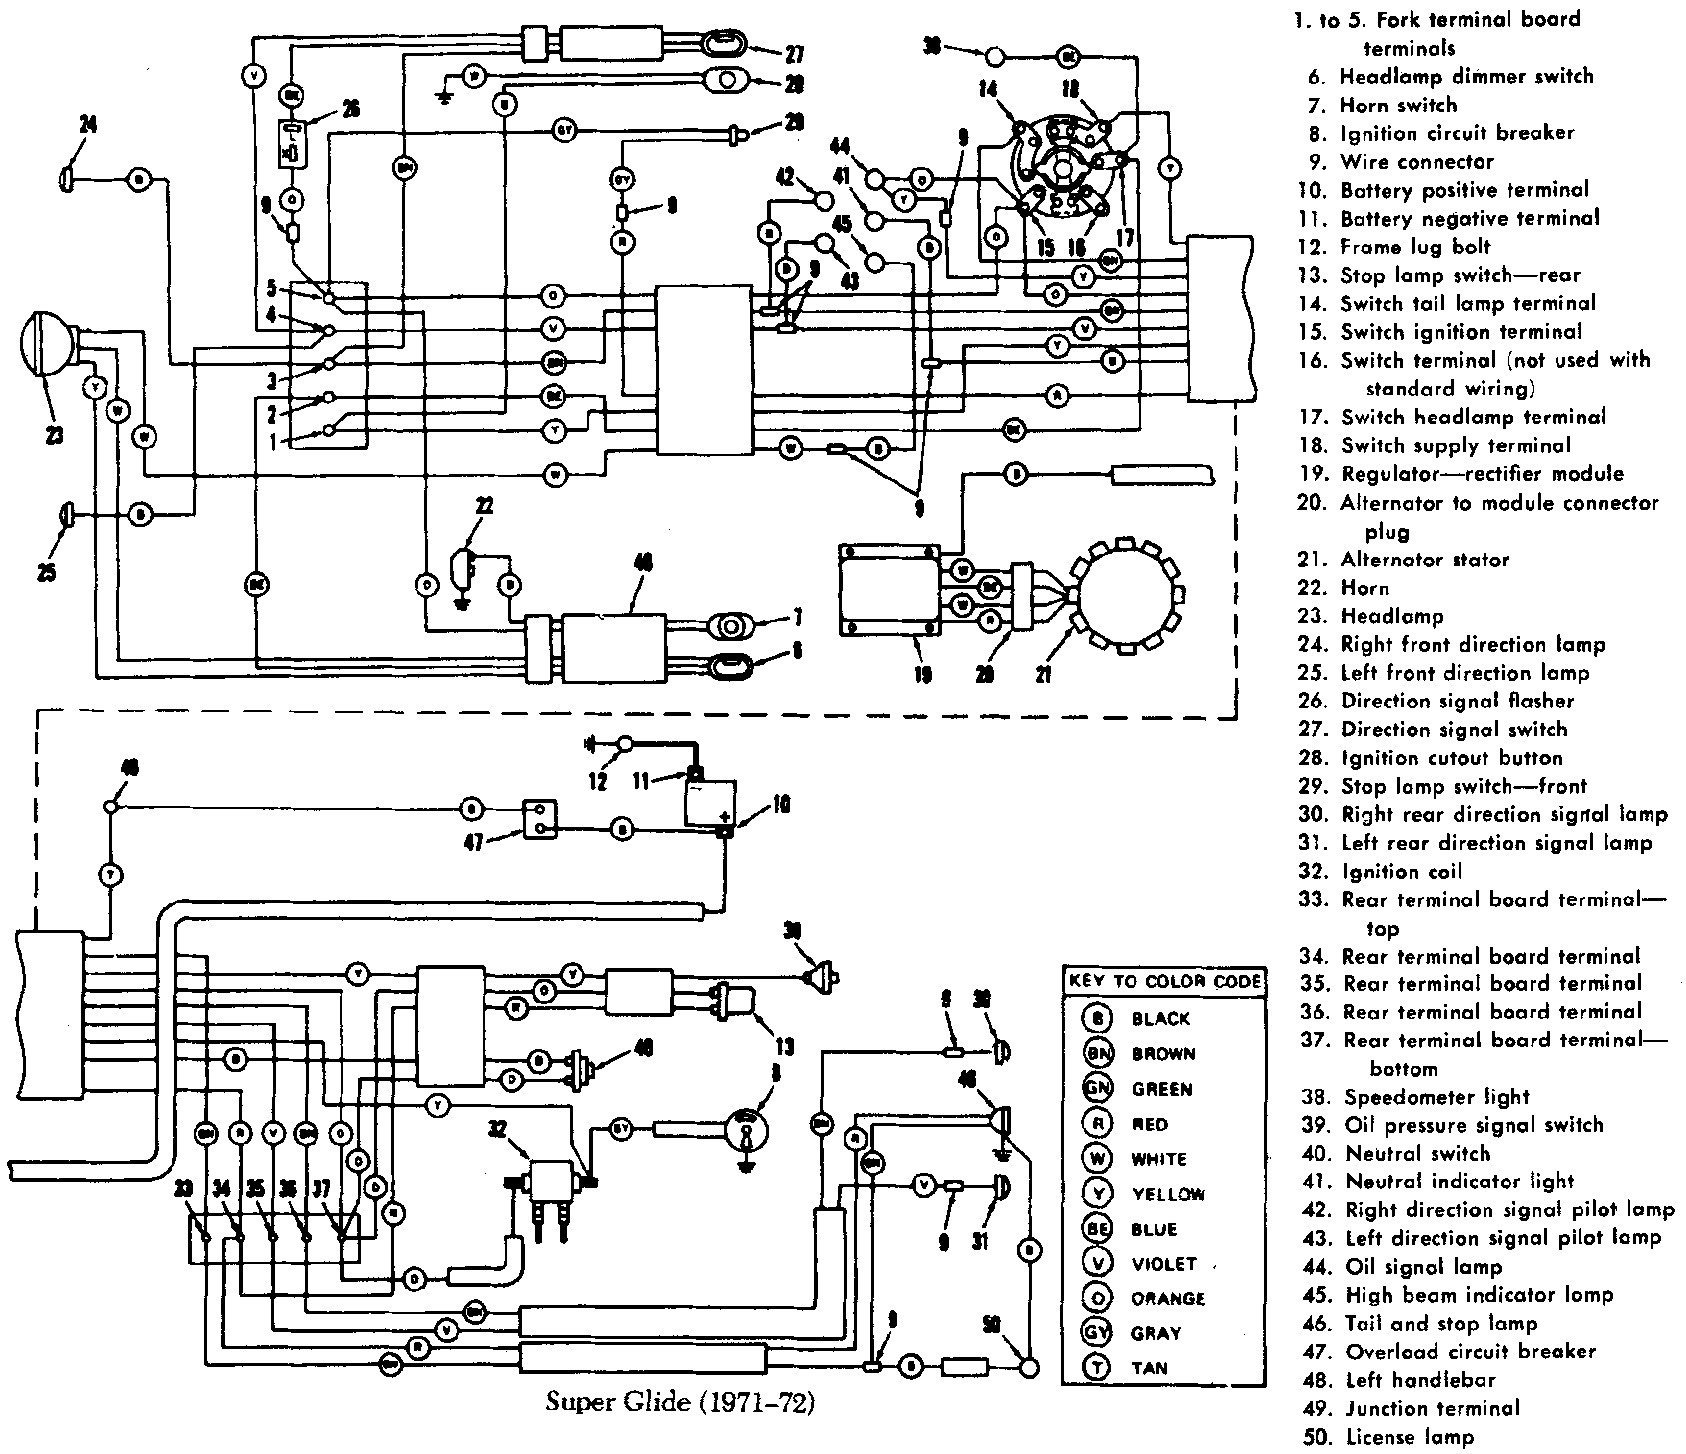 harley ignition switch wiring diagram Collection Gallery of Fresh Harley Davidson Ignition Switch Wiring Diagram